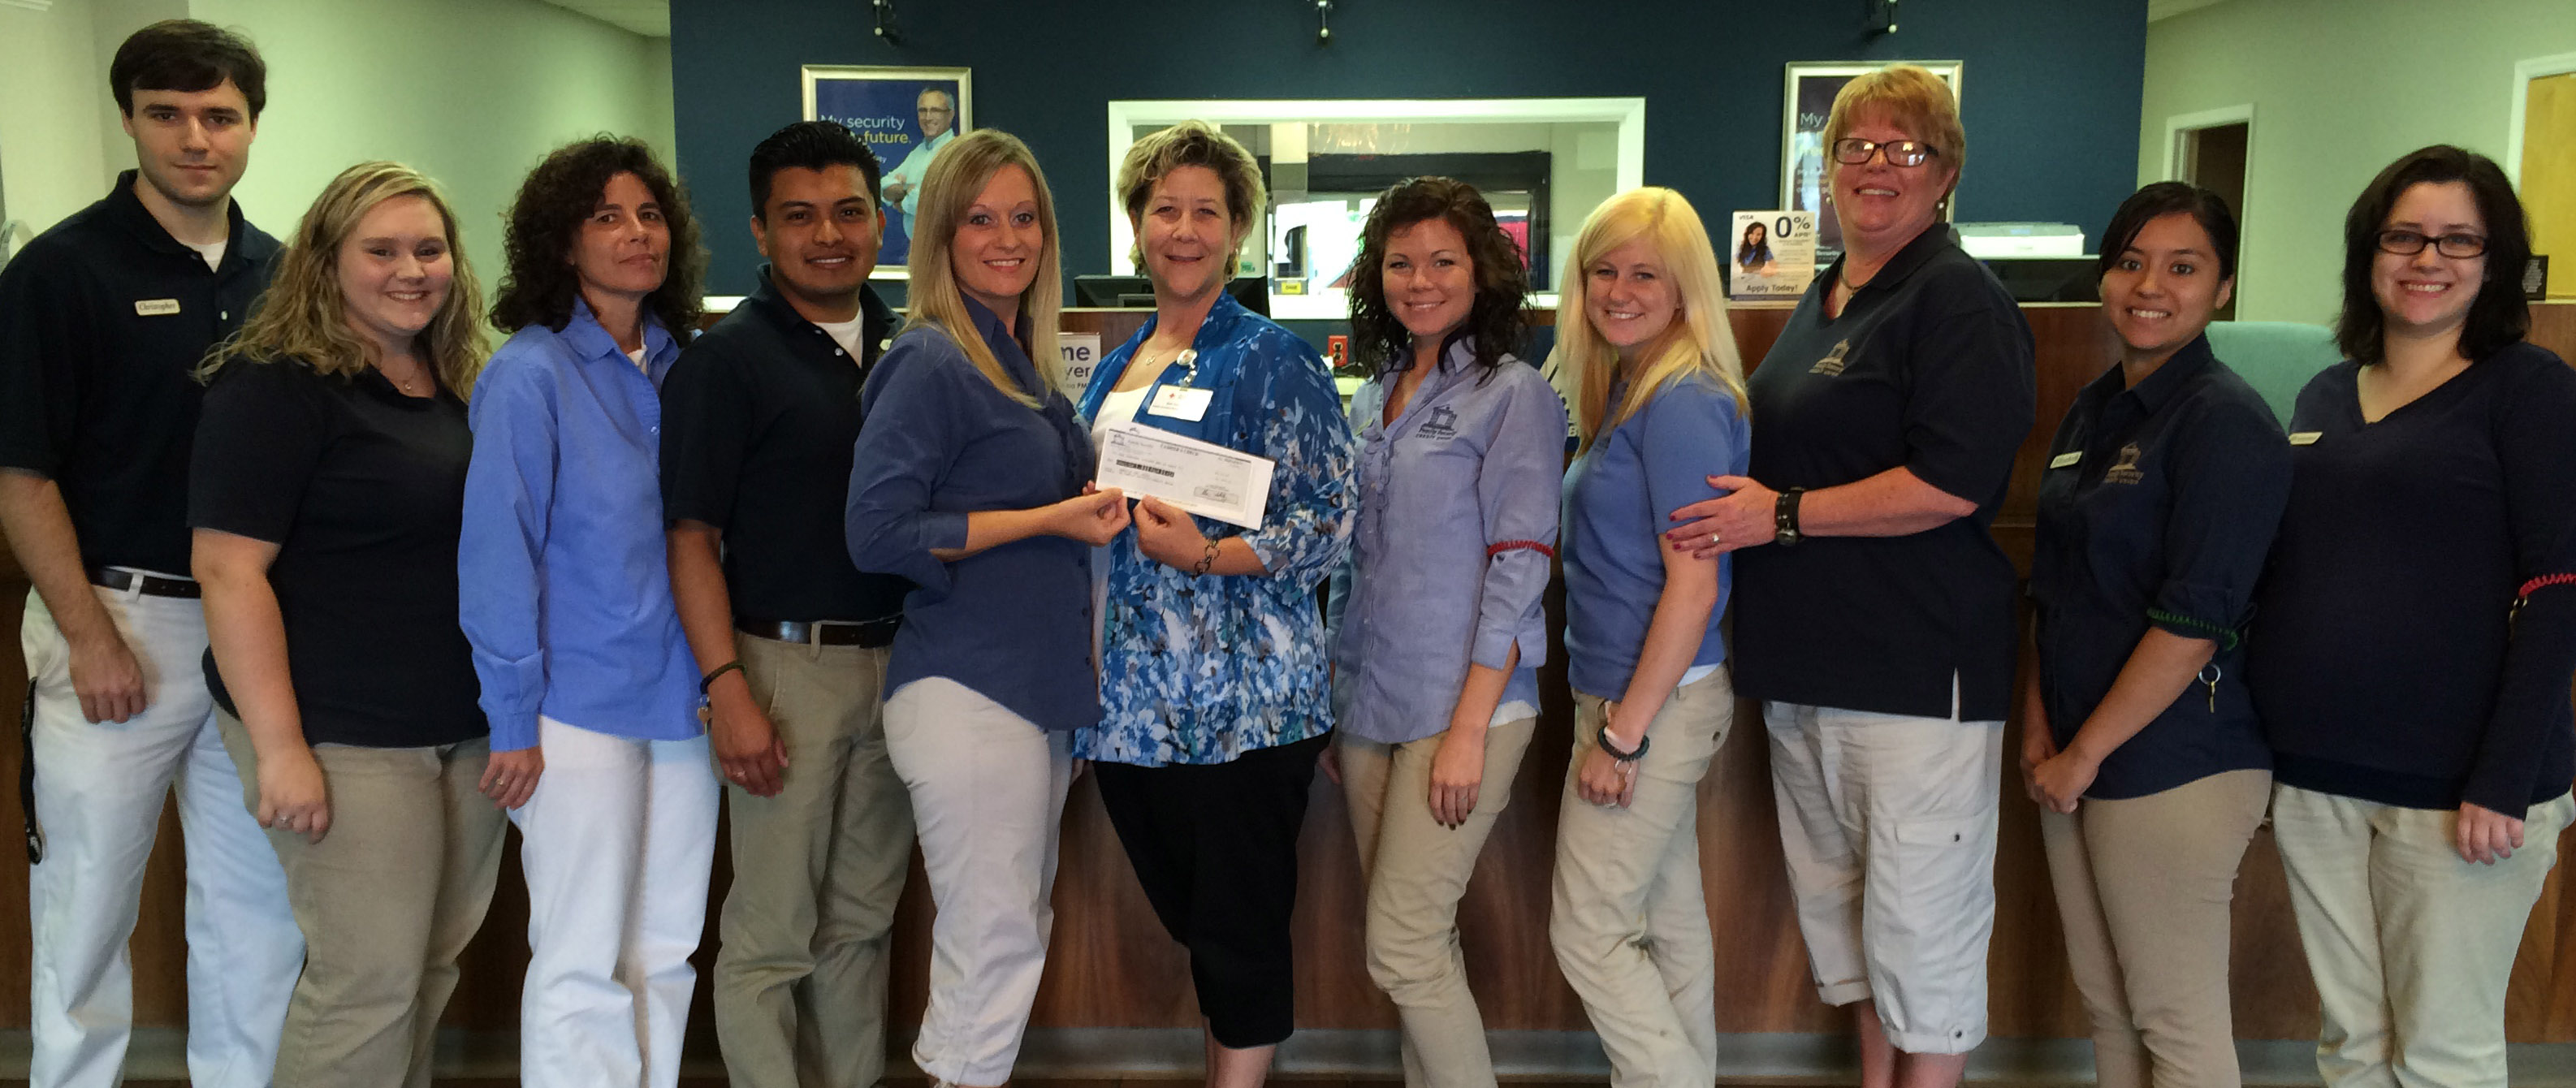 Decatur-Main Donates To The American Red Cross